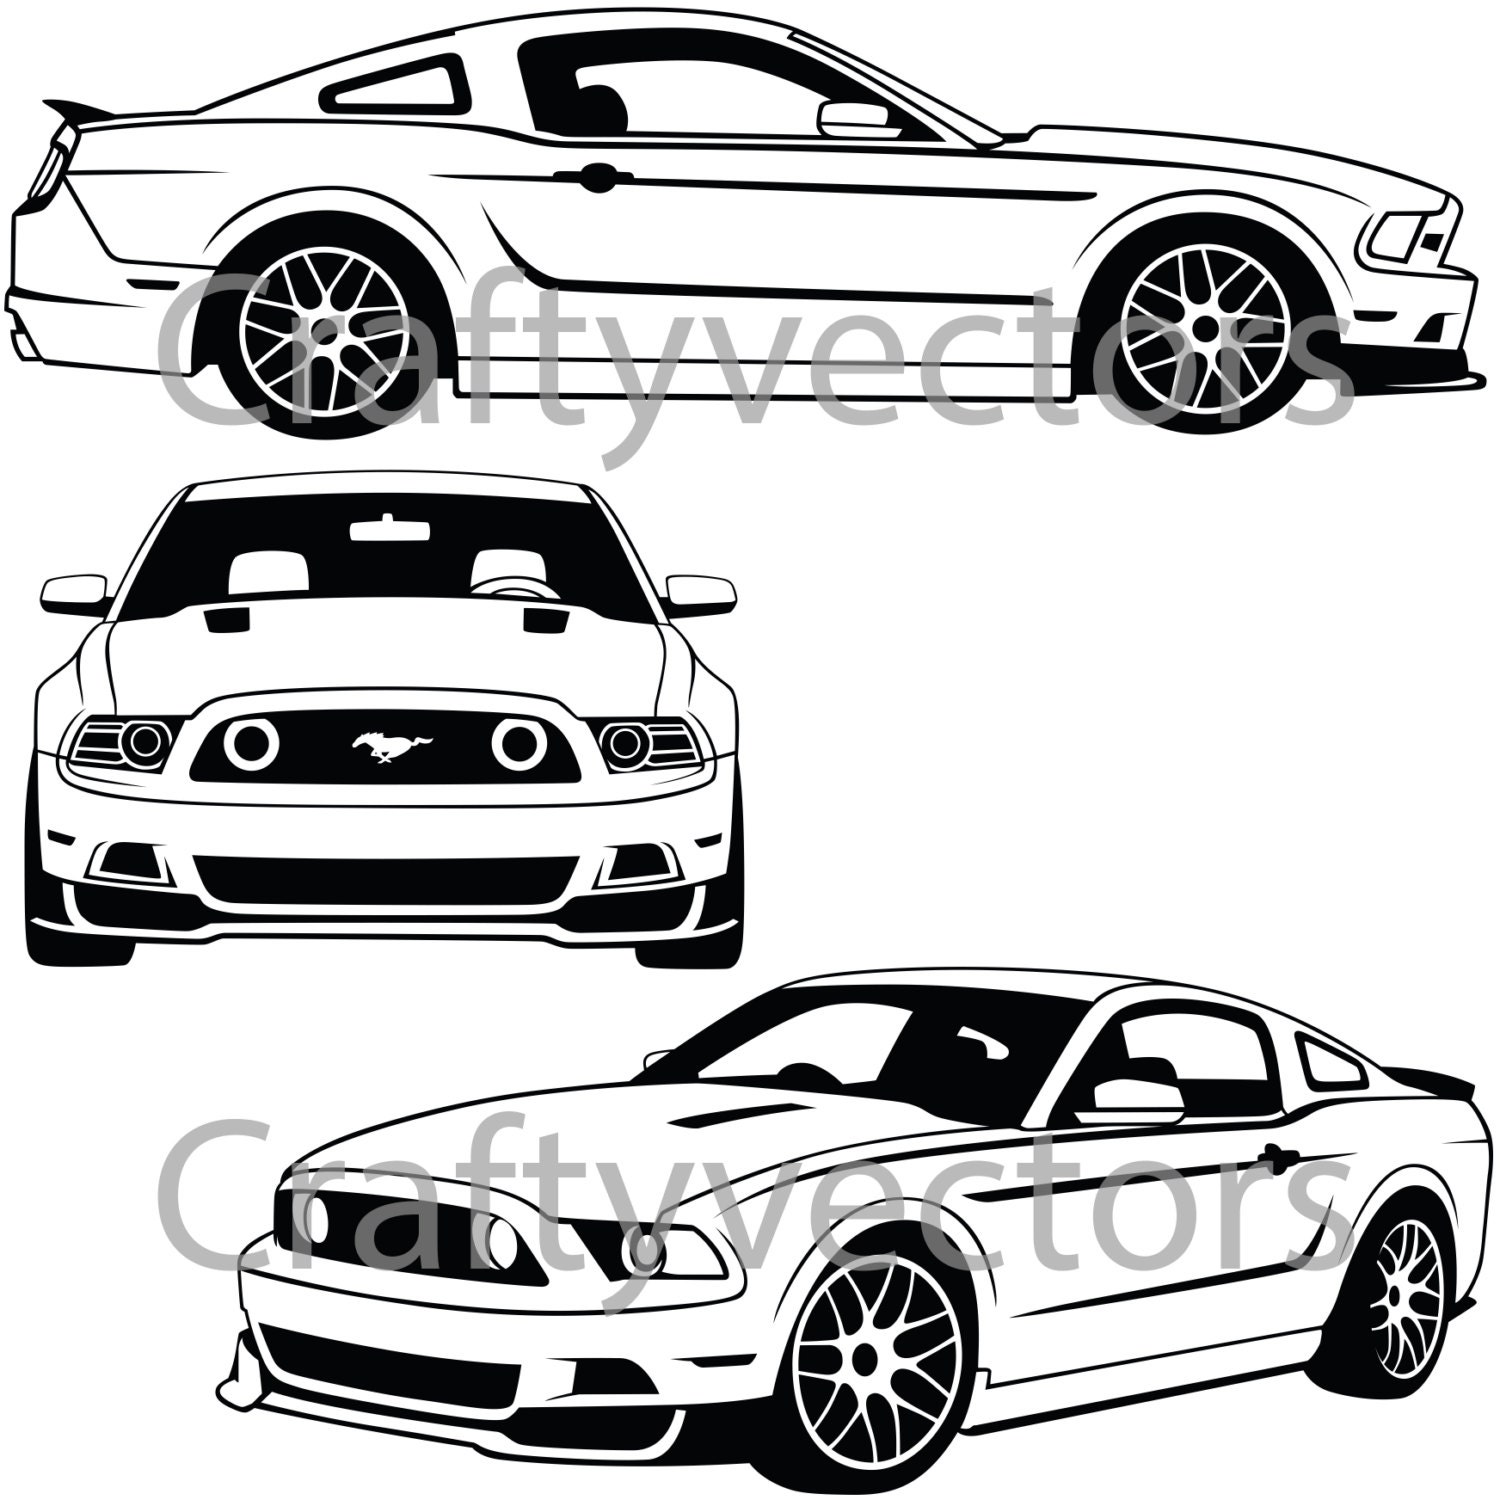 Download Ford Mustang 2013 Vector File from CraftyVectors on Etsy ...